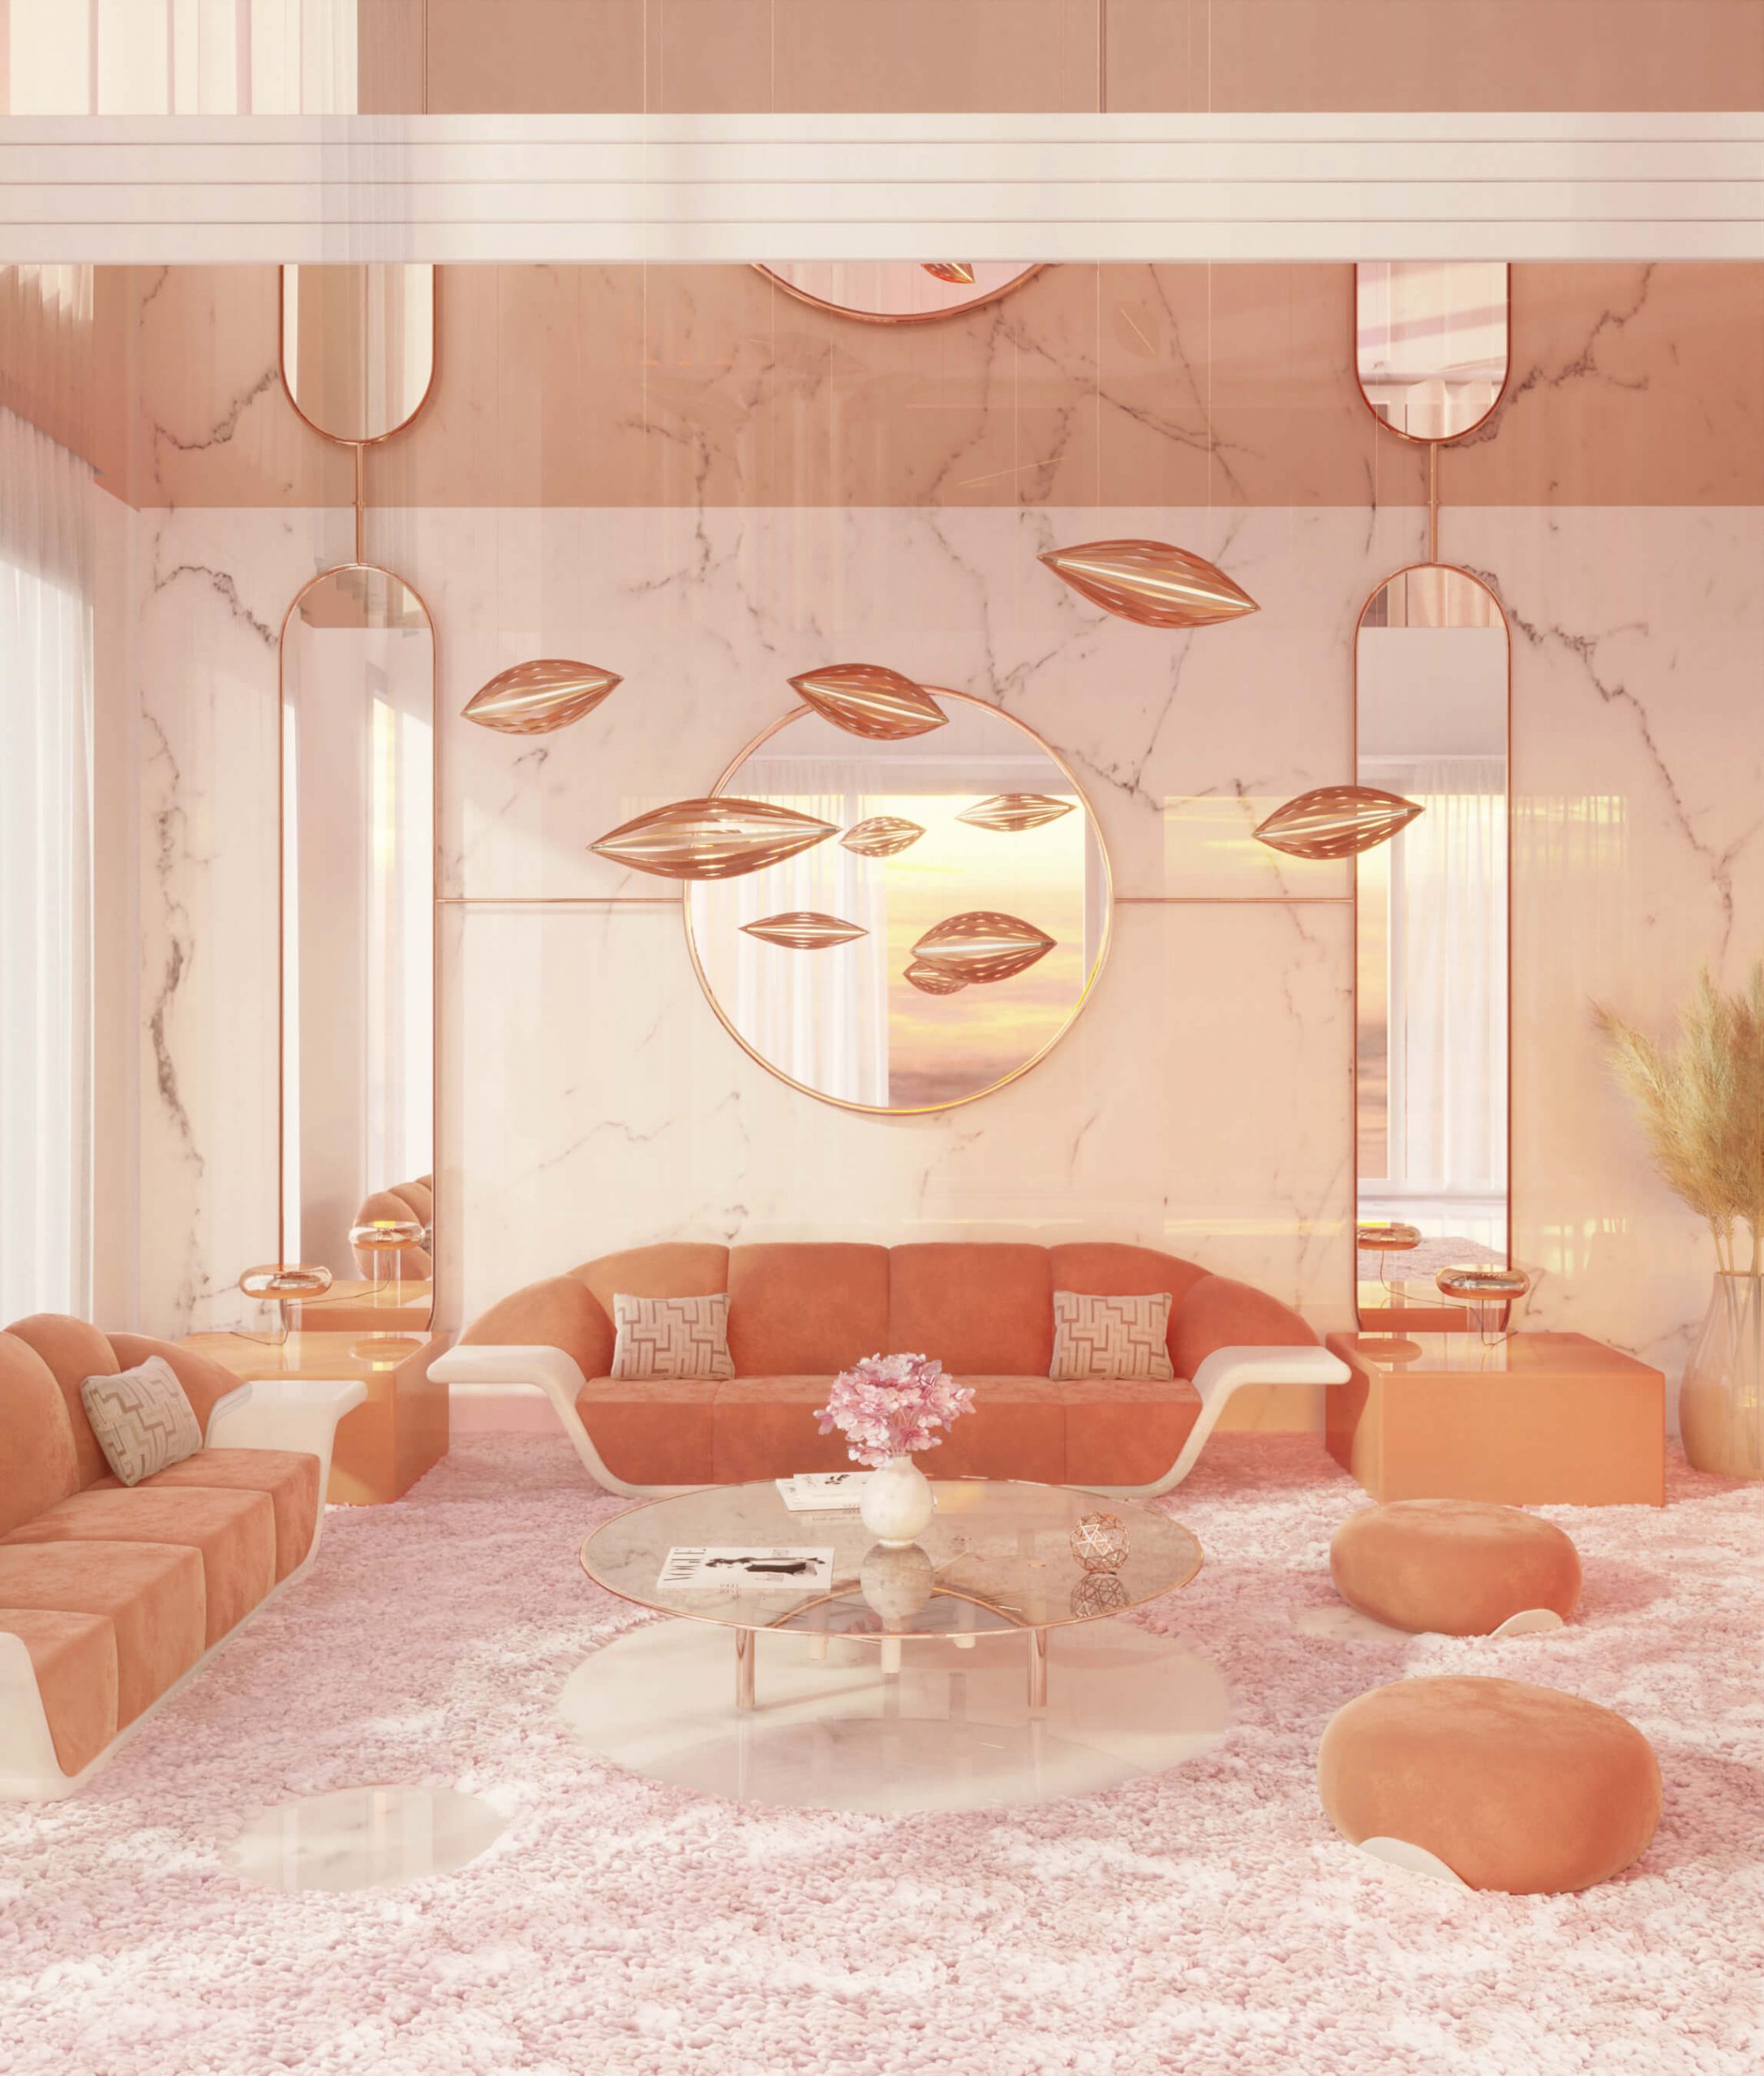 THE FUTURISTIC LIVING ROOM OF YOUR DREAMS